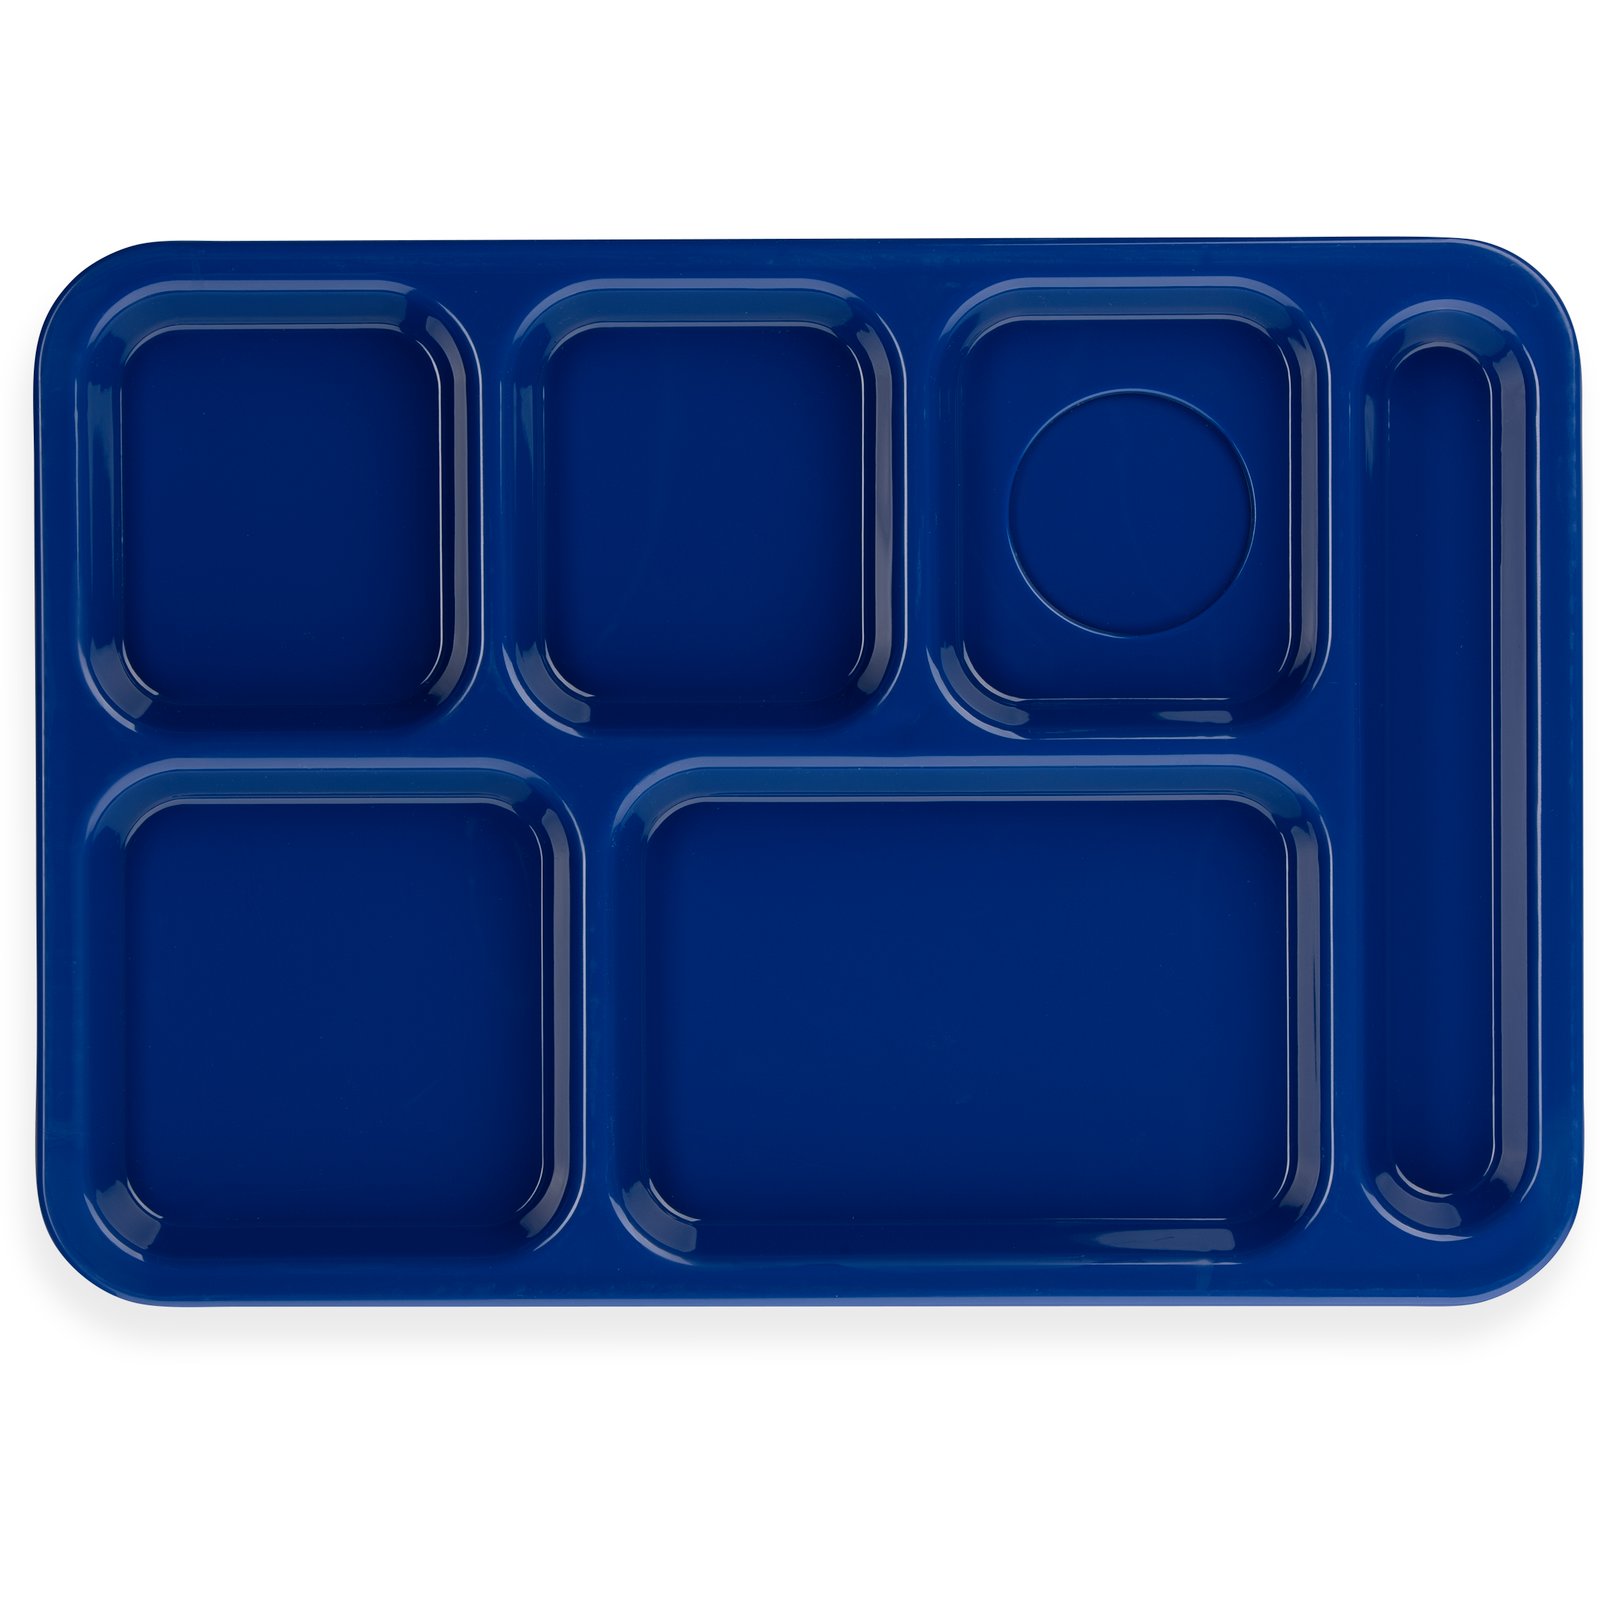 P614R14 - Right-Hand 6-Compartment Polypropylene Tray 10 x 14